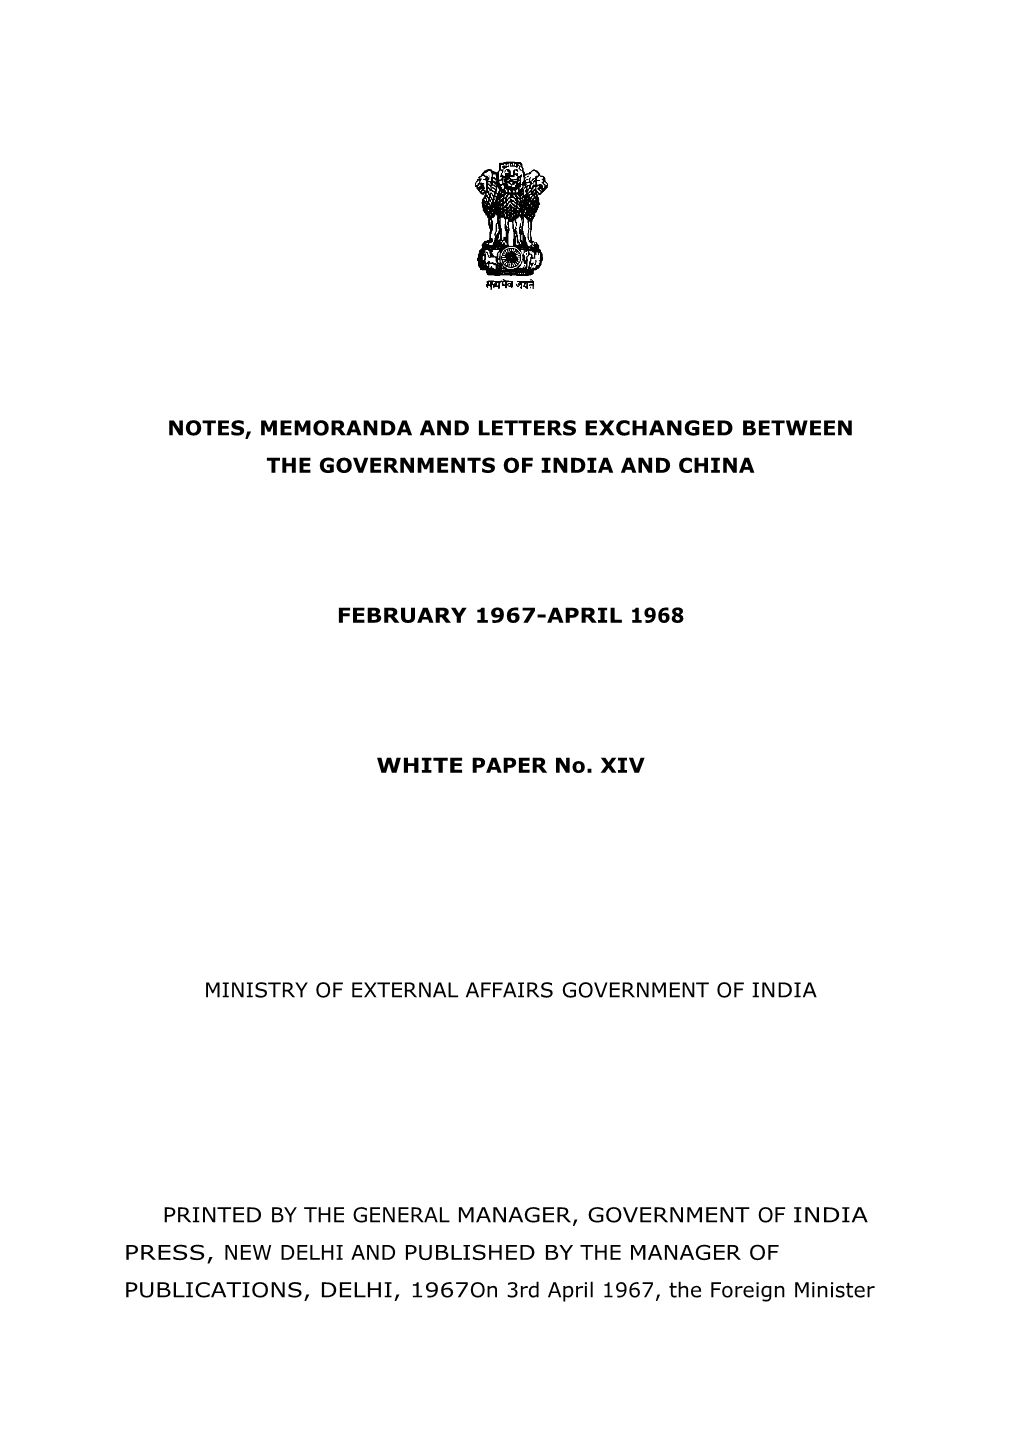 NOTES, MEMORANDA and LETTERS EXCHANGED BETWEEN the GOVERNMENTS of INDIA and CHINA FEBRUARY 1967-APRIL 1968 WHITE PAPER No. XIV M